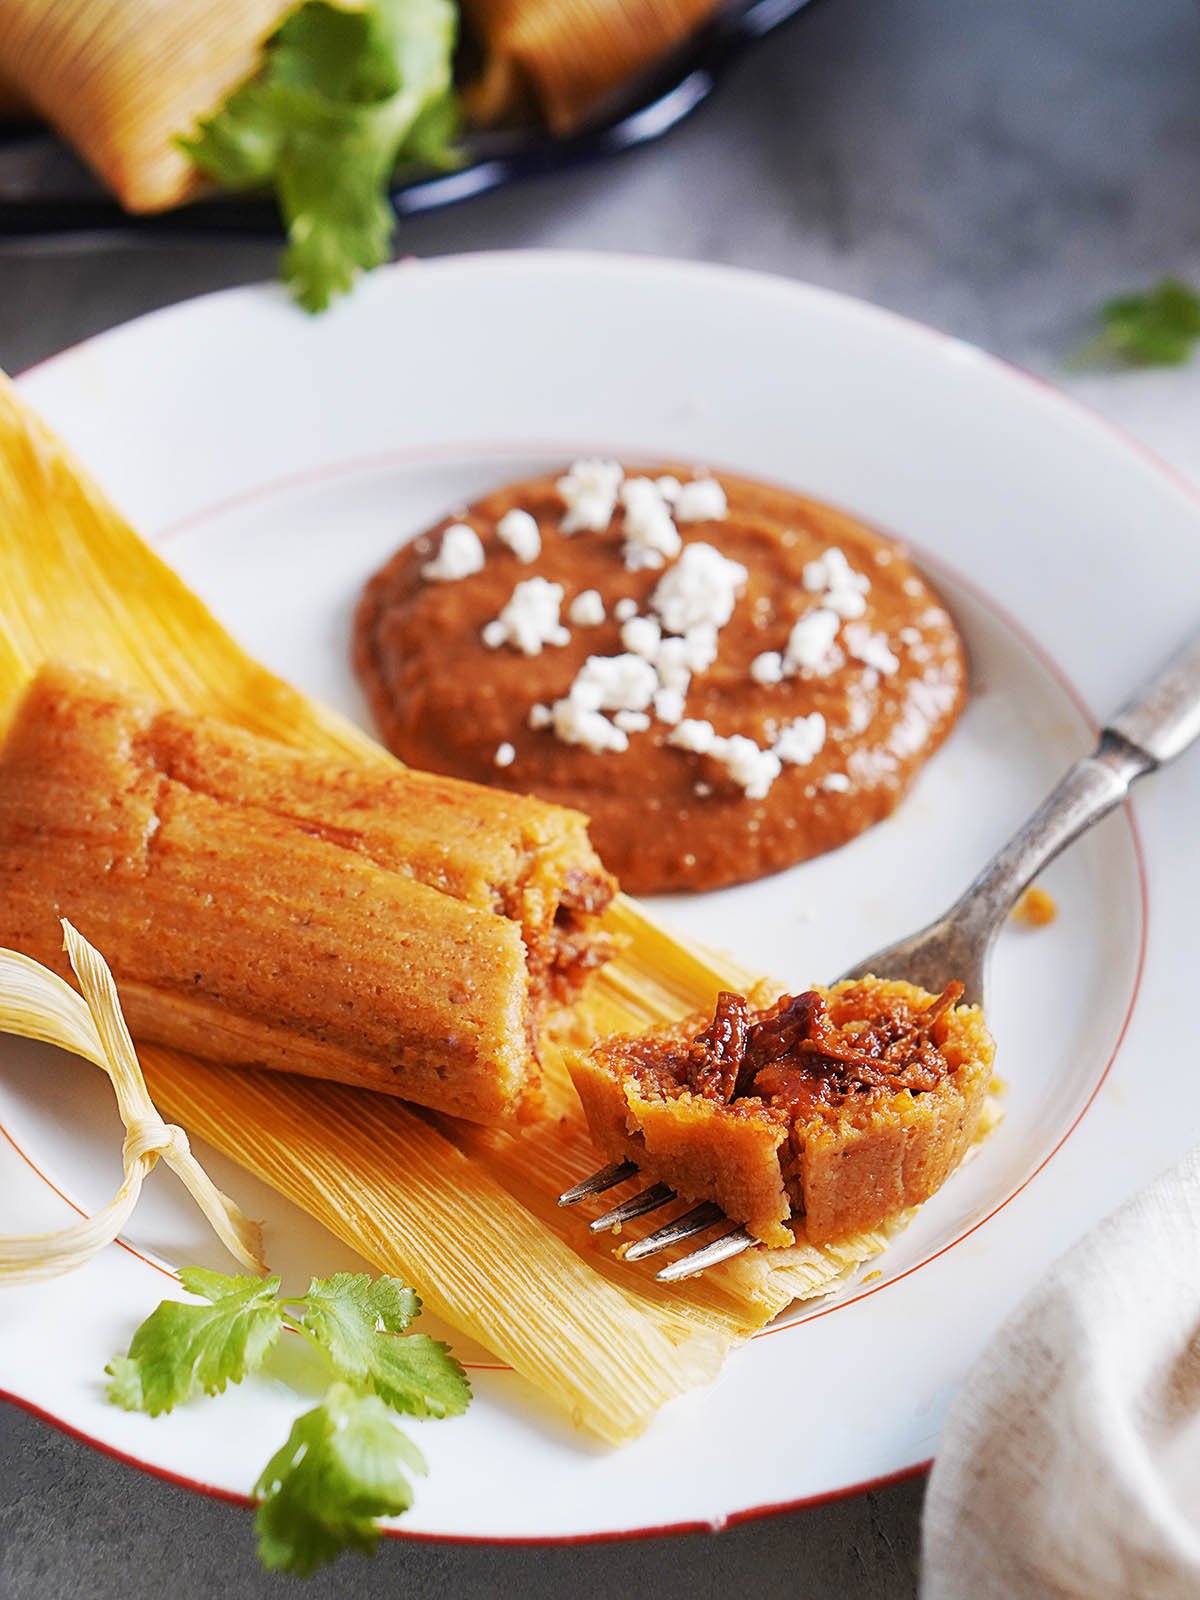 A close up image of tamales and a piece of it on a fork.